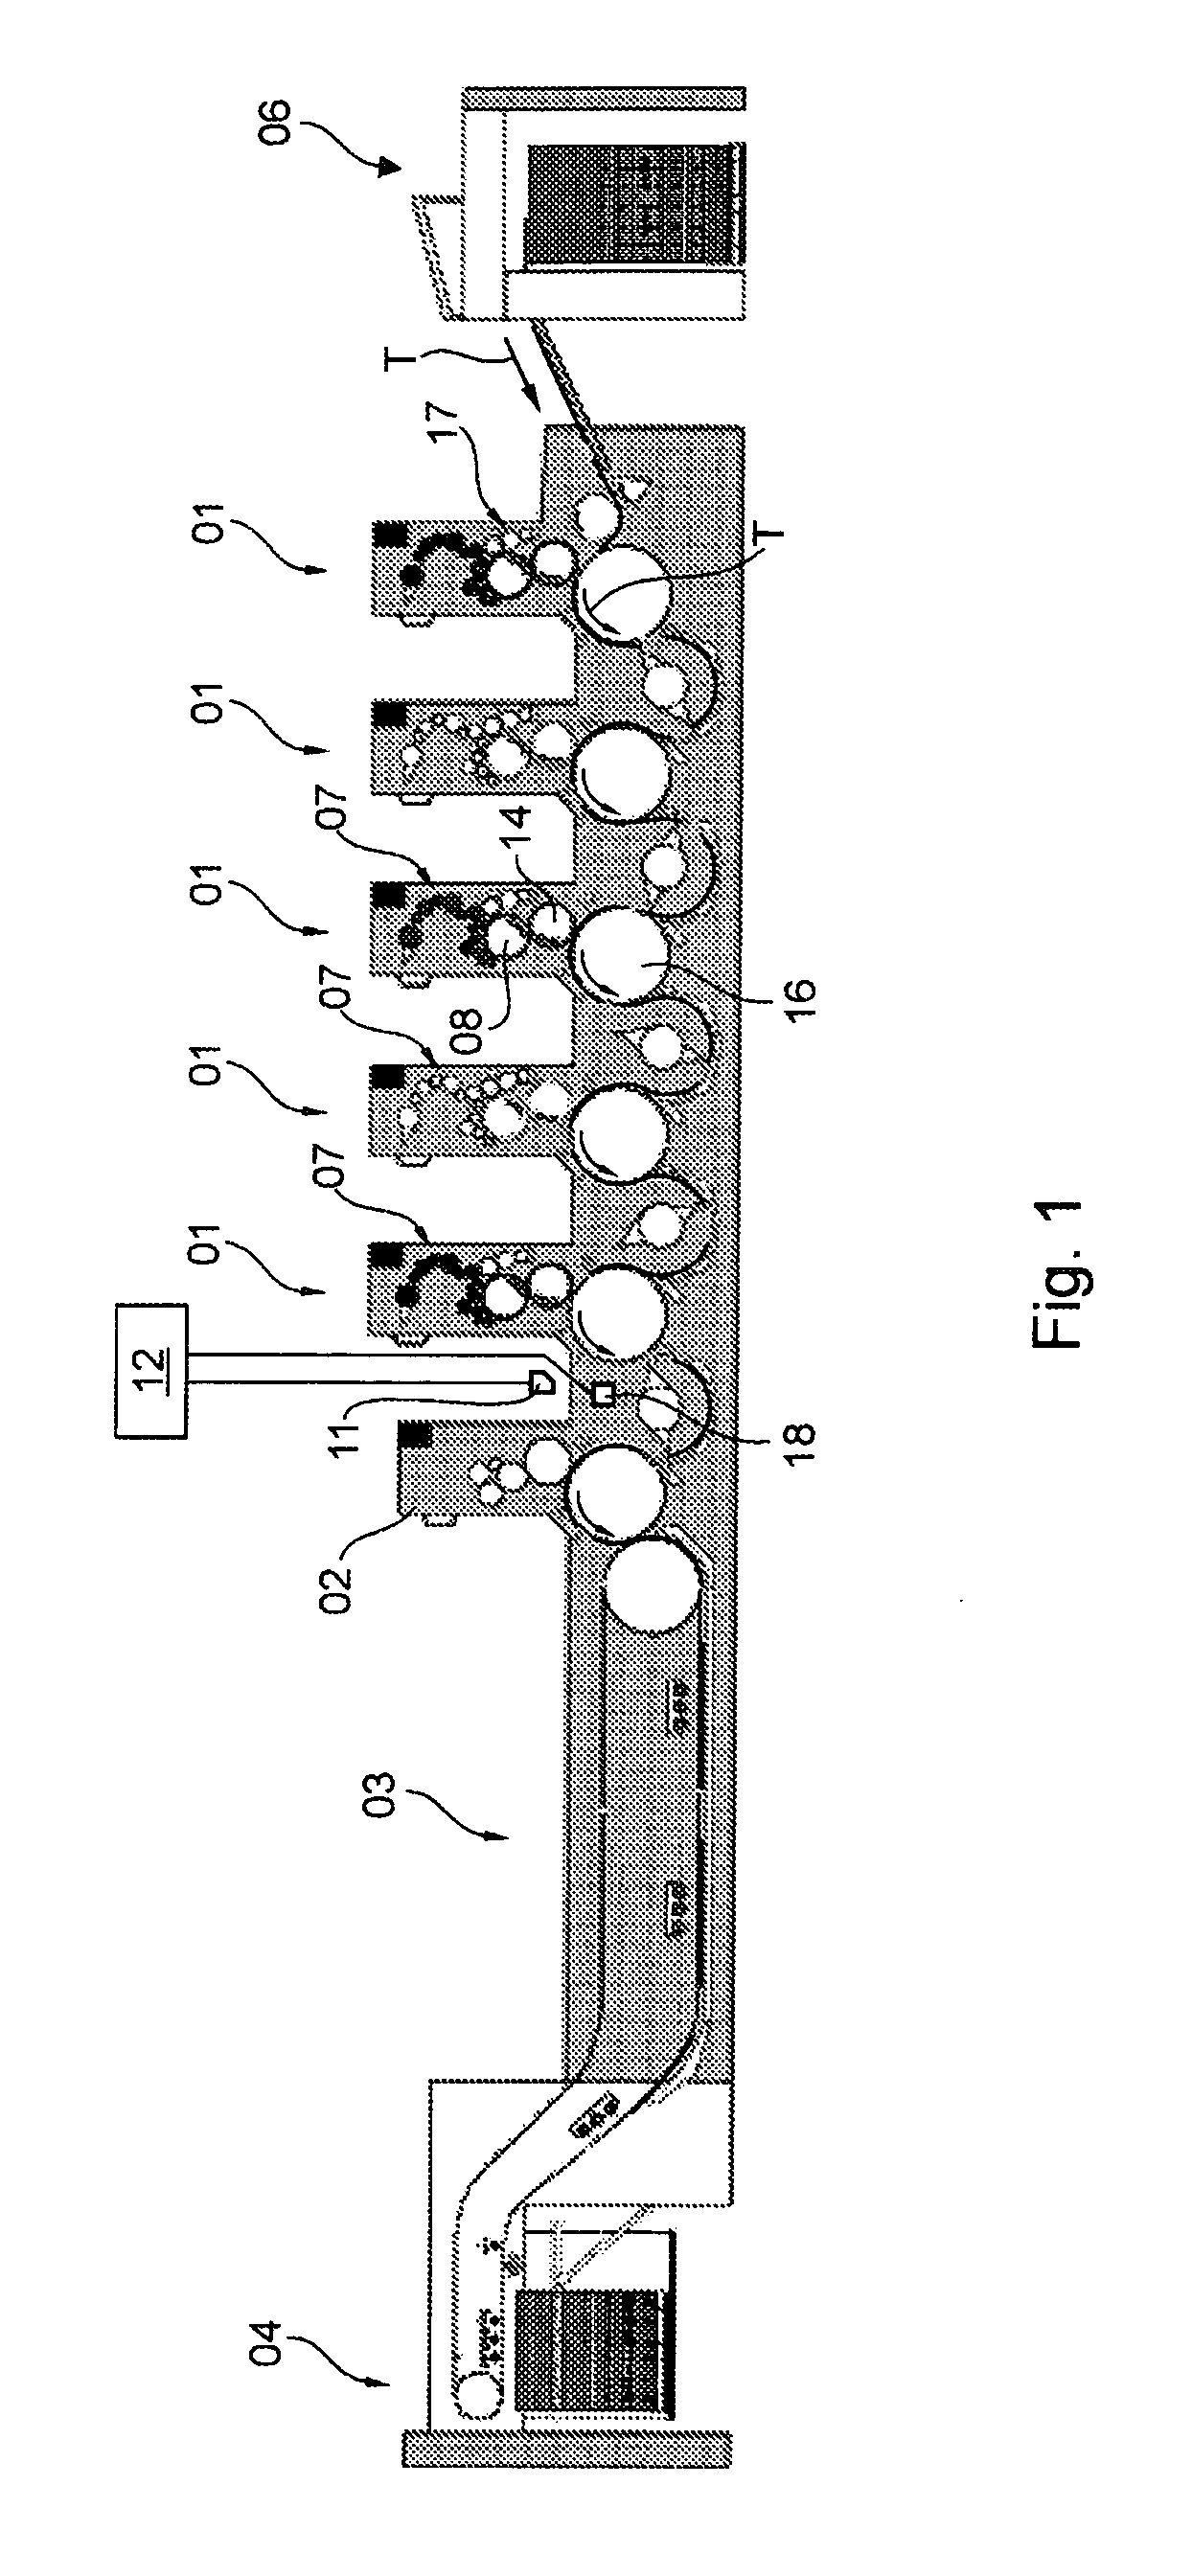 Method for regulating the ink in a printing press